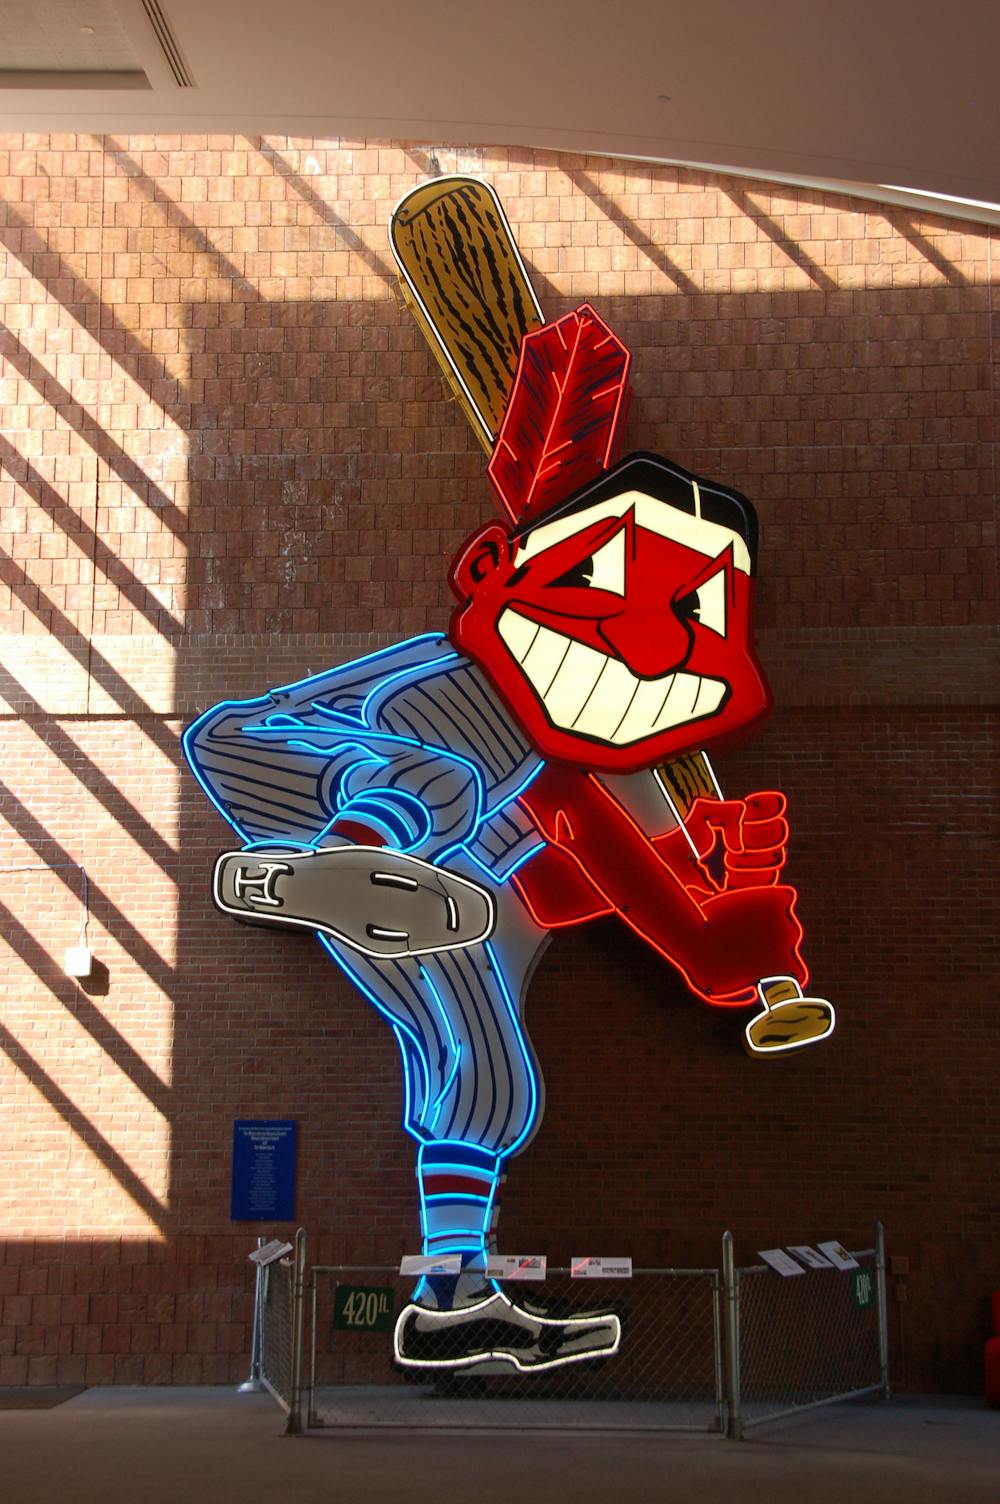 Talk it out: Did the Cleveland Indians do right removing Chief Wahoo from  uniforms? 